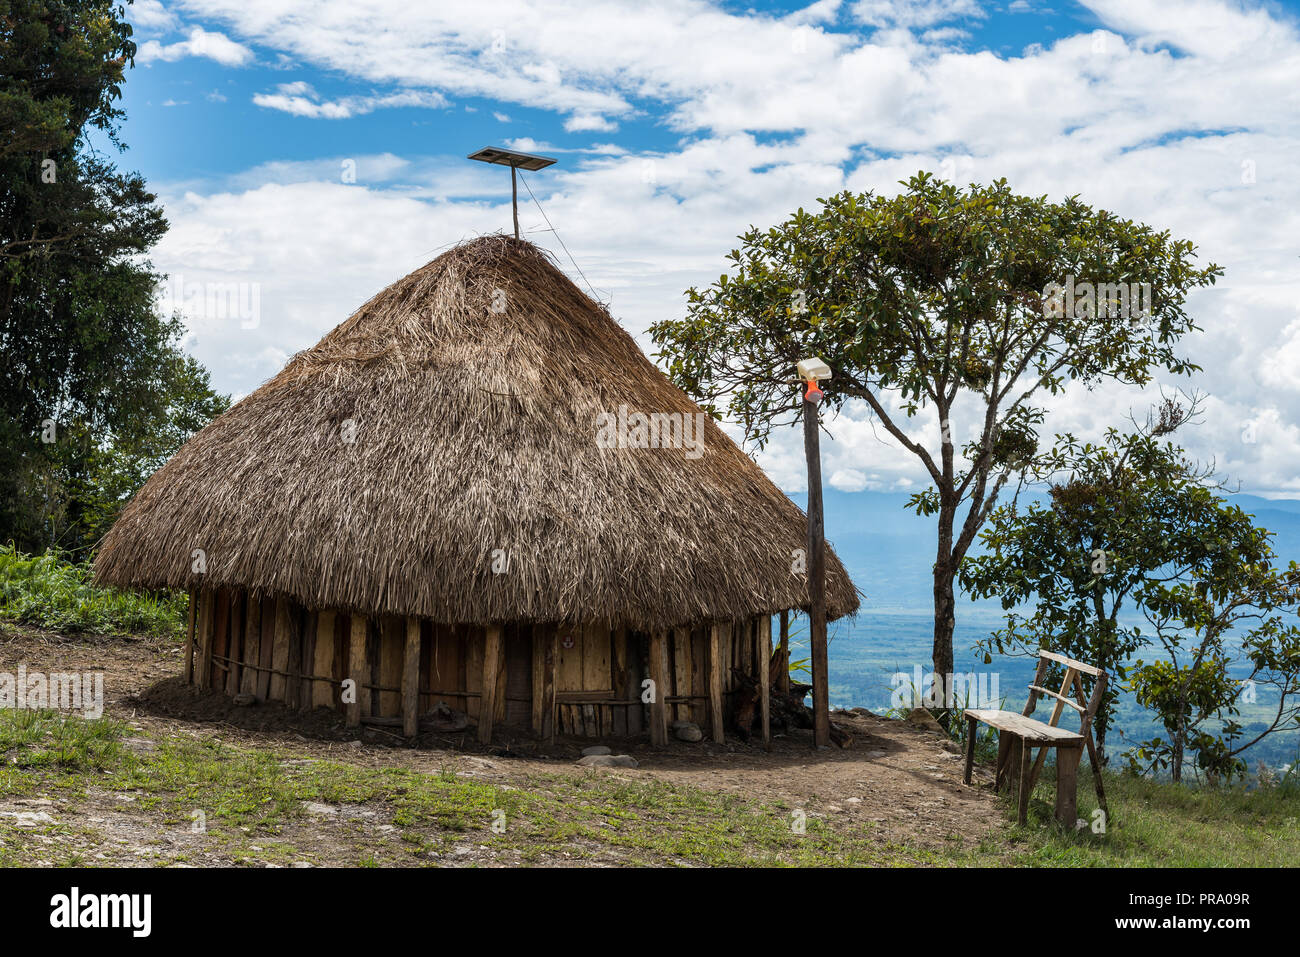 Solar panel and electric light becomes part of grass-topped hut of native Dani people. Wamena, Papua, Indonesia. Stock Photo